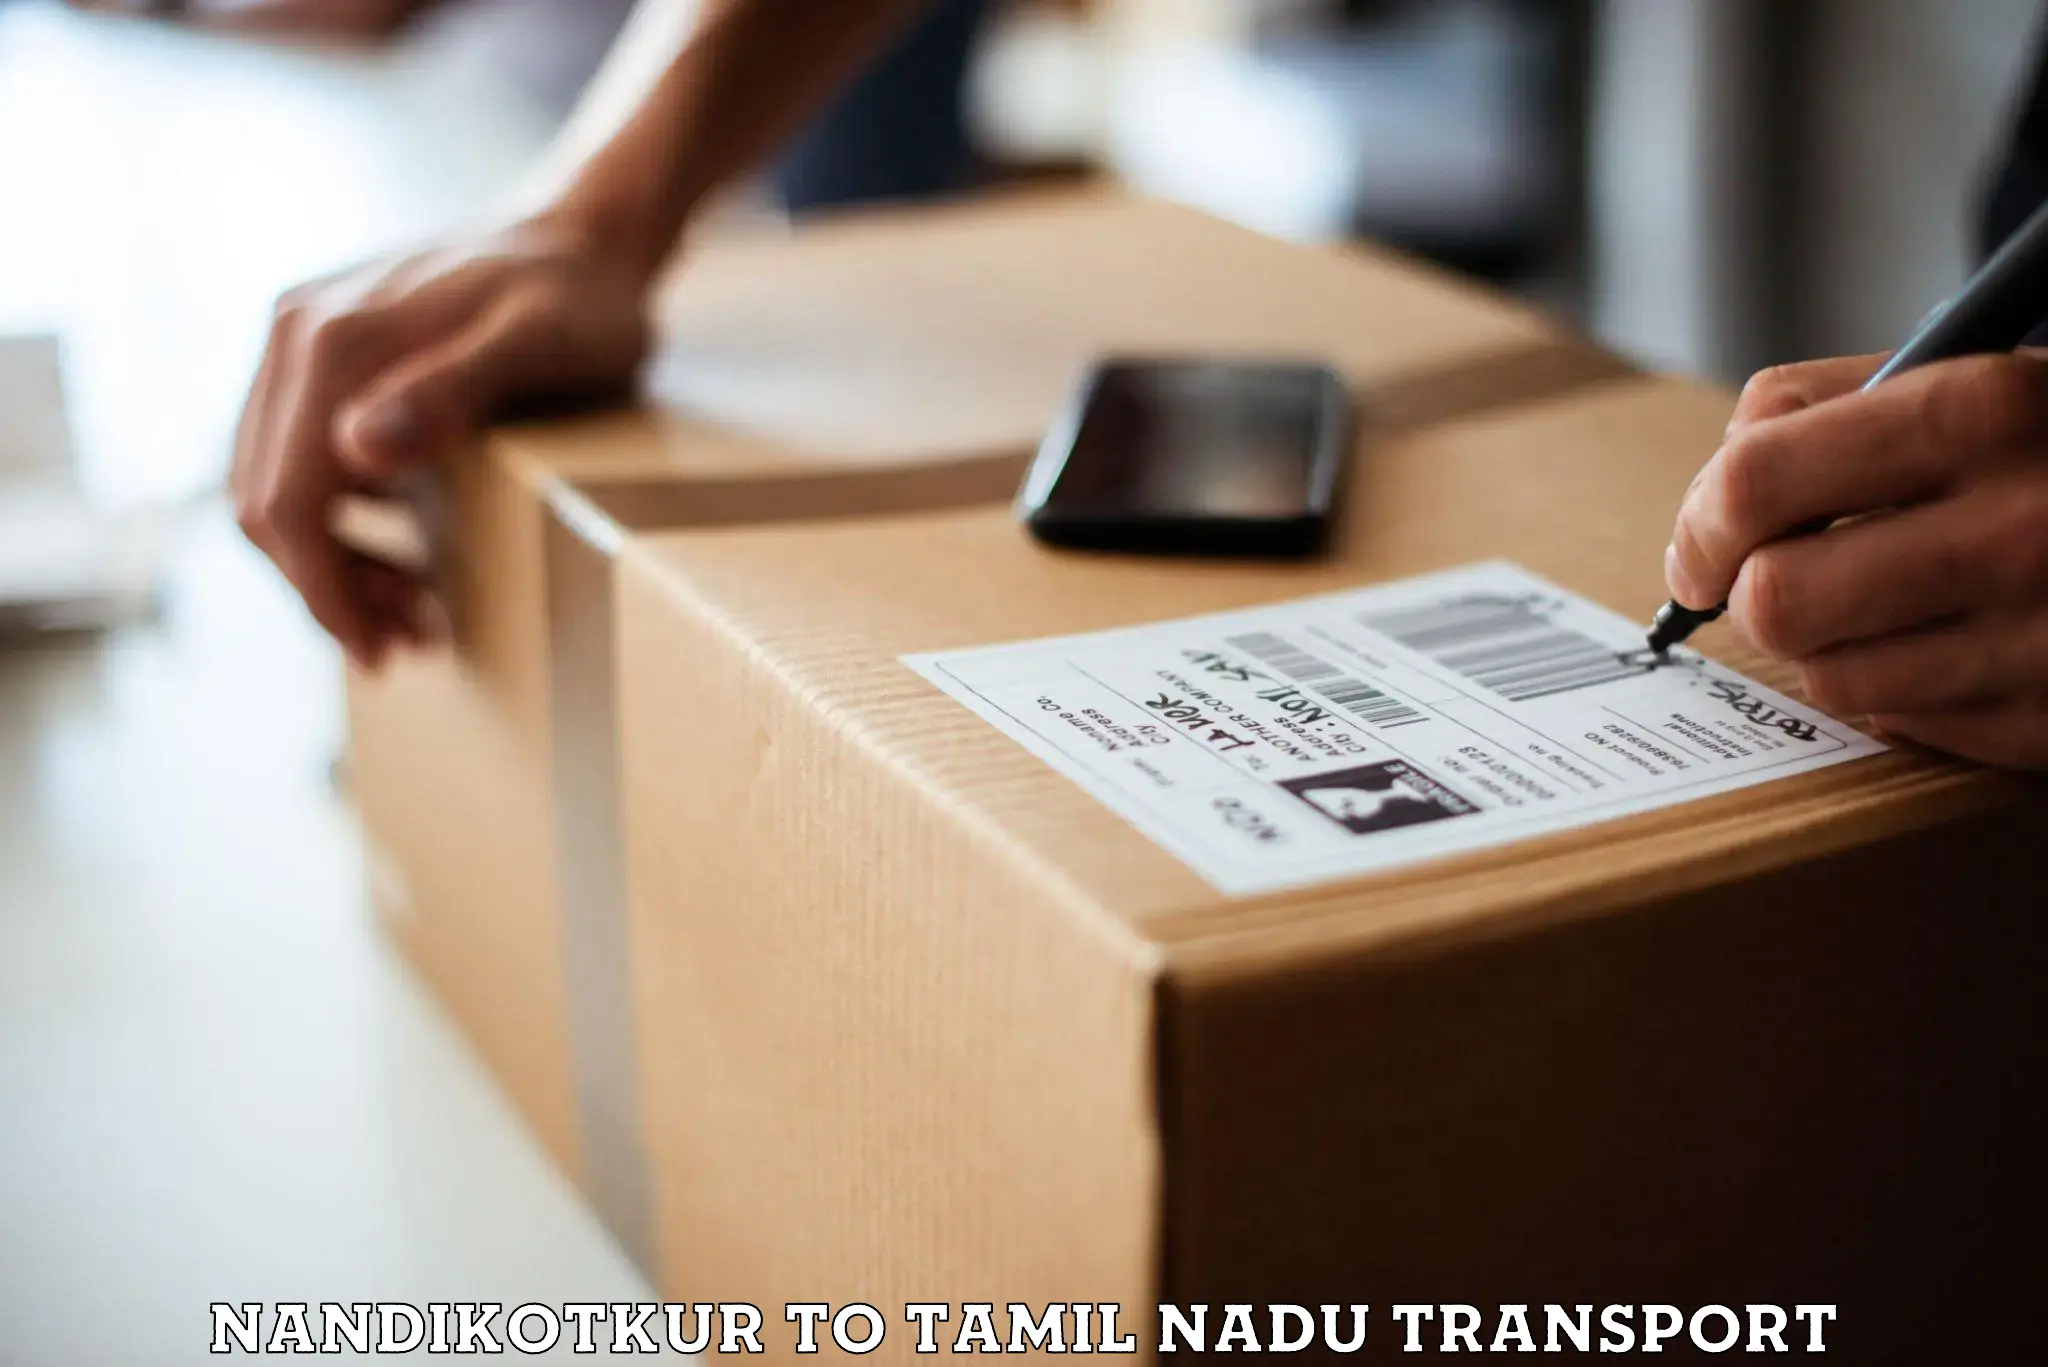 Container transport service Nandikotkur to Shanmugha Arts Science Technology and Research Academy Thanjavur